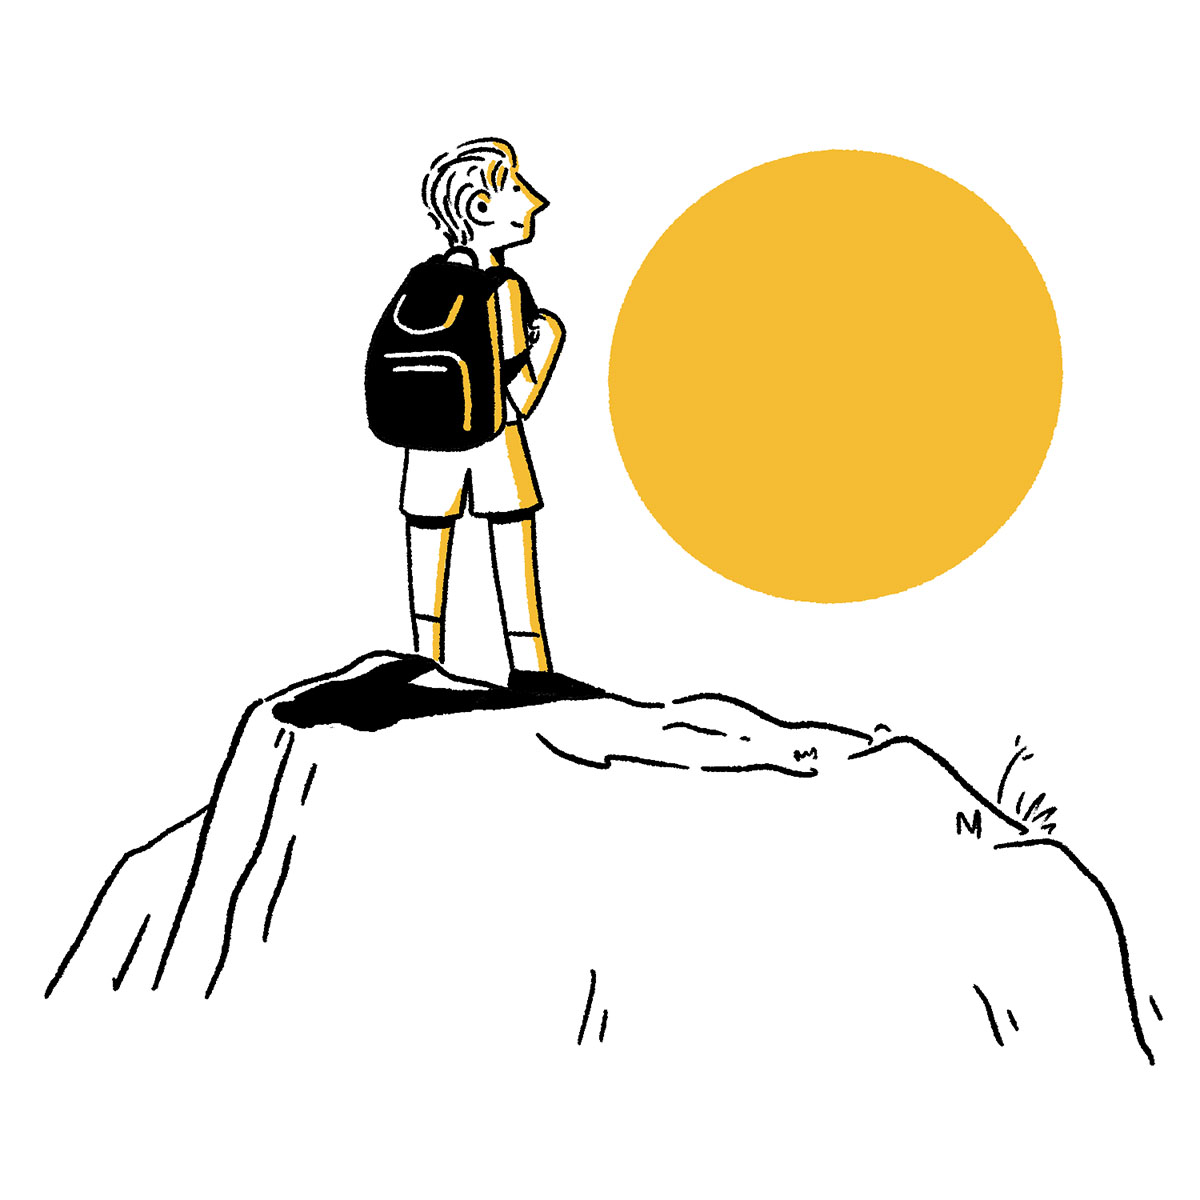 An illustration of a person standing on top of a mountain